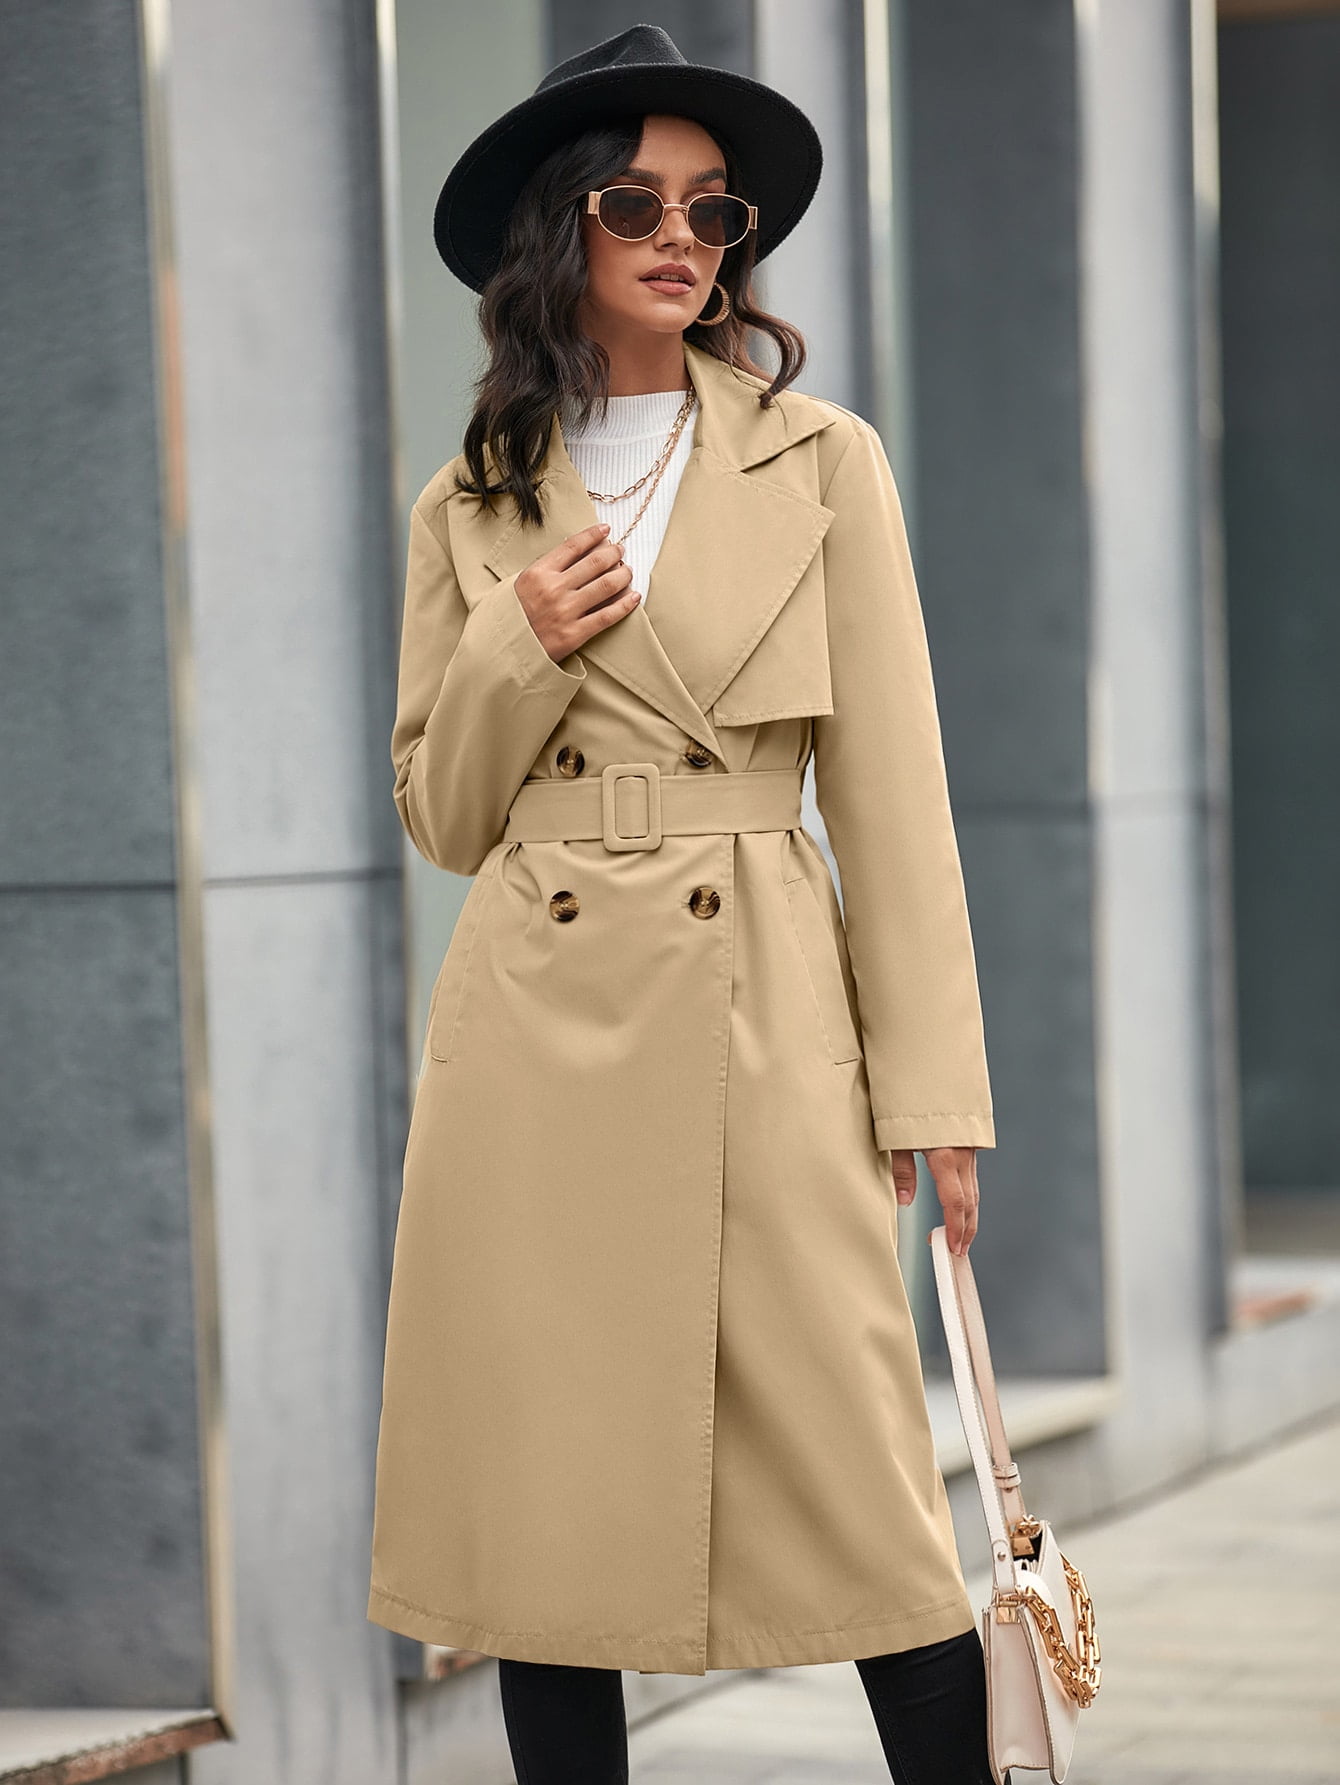 Women Slim Fall Double Breasted Lapel Belted Trench Coat Jacket 